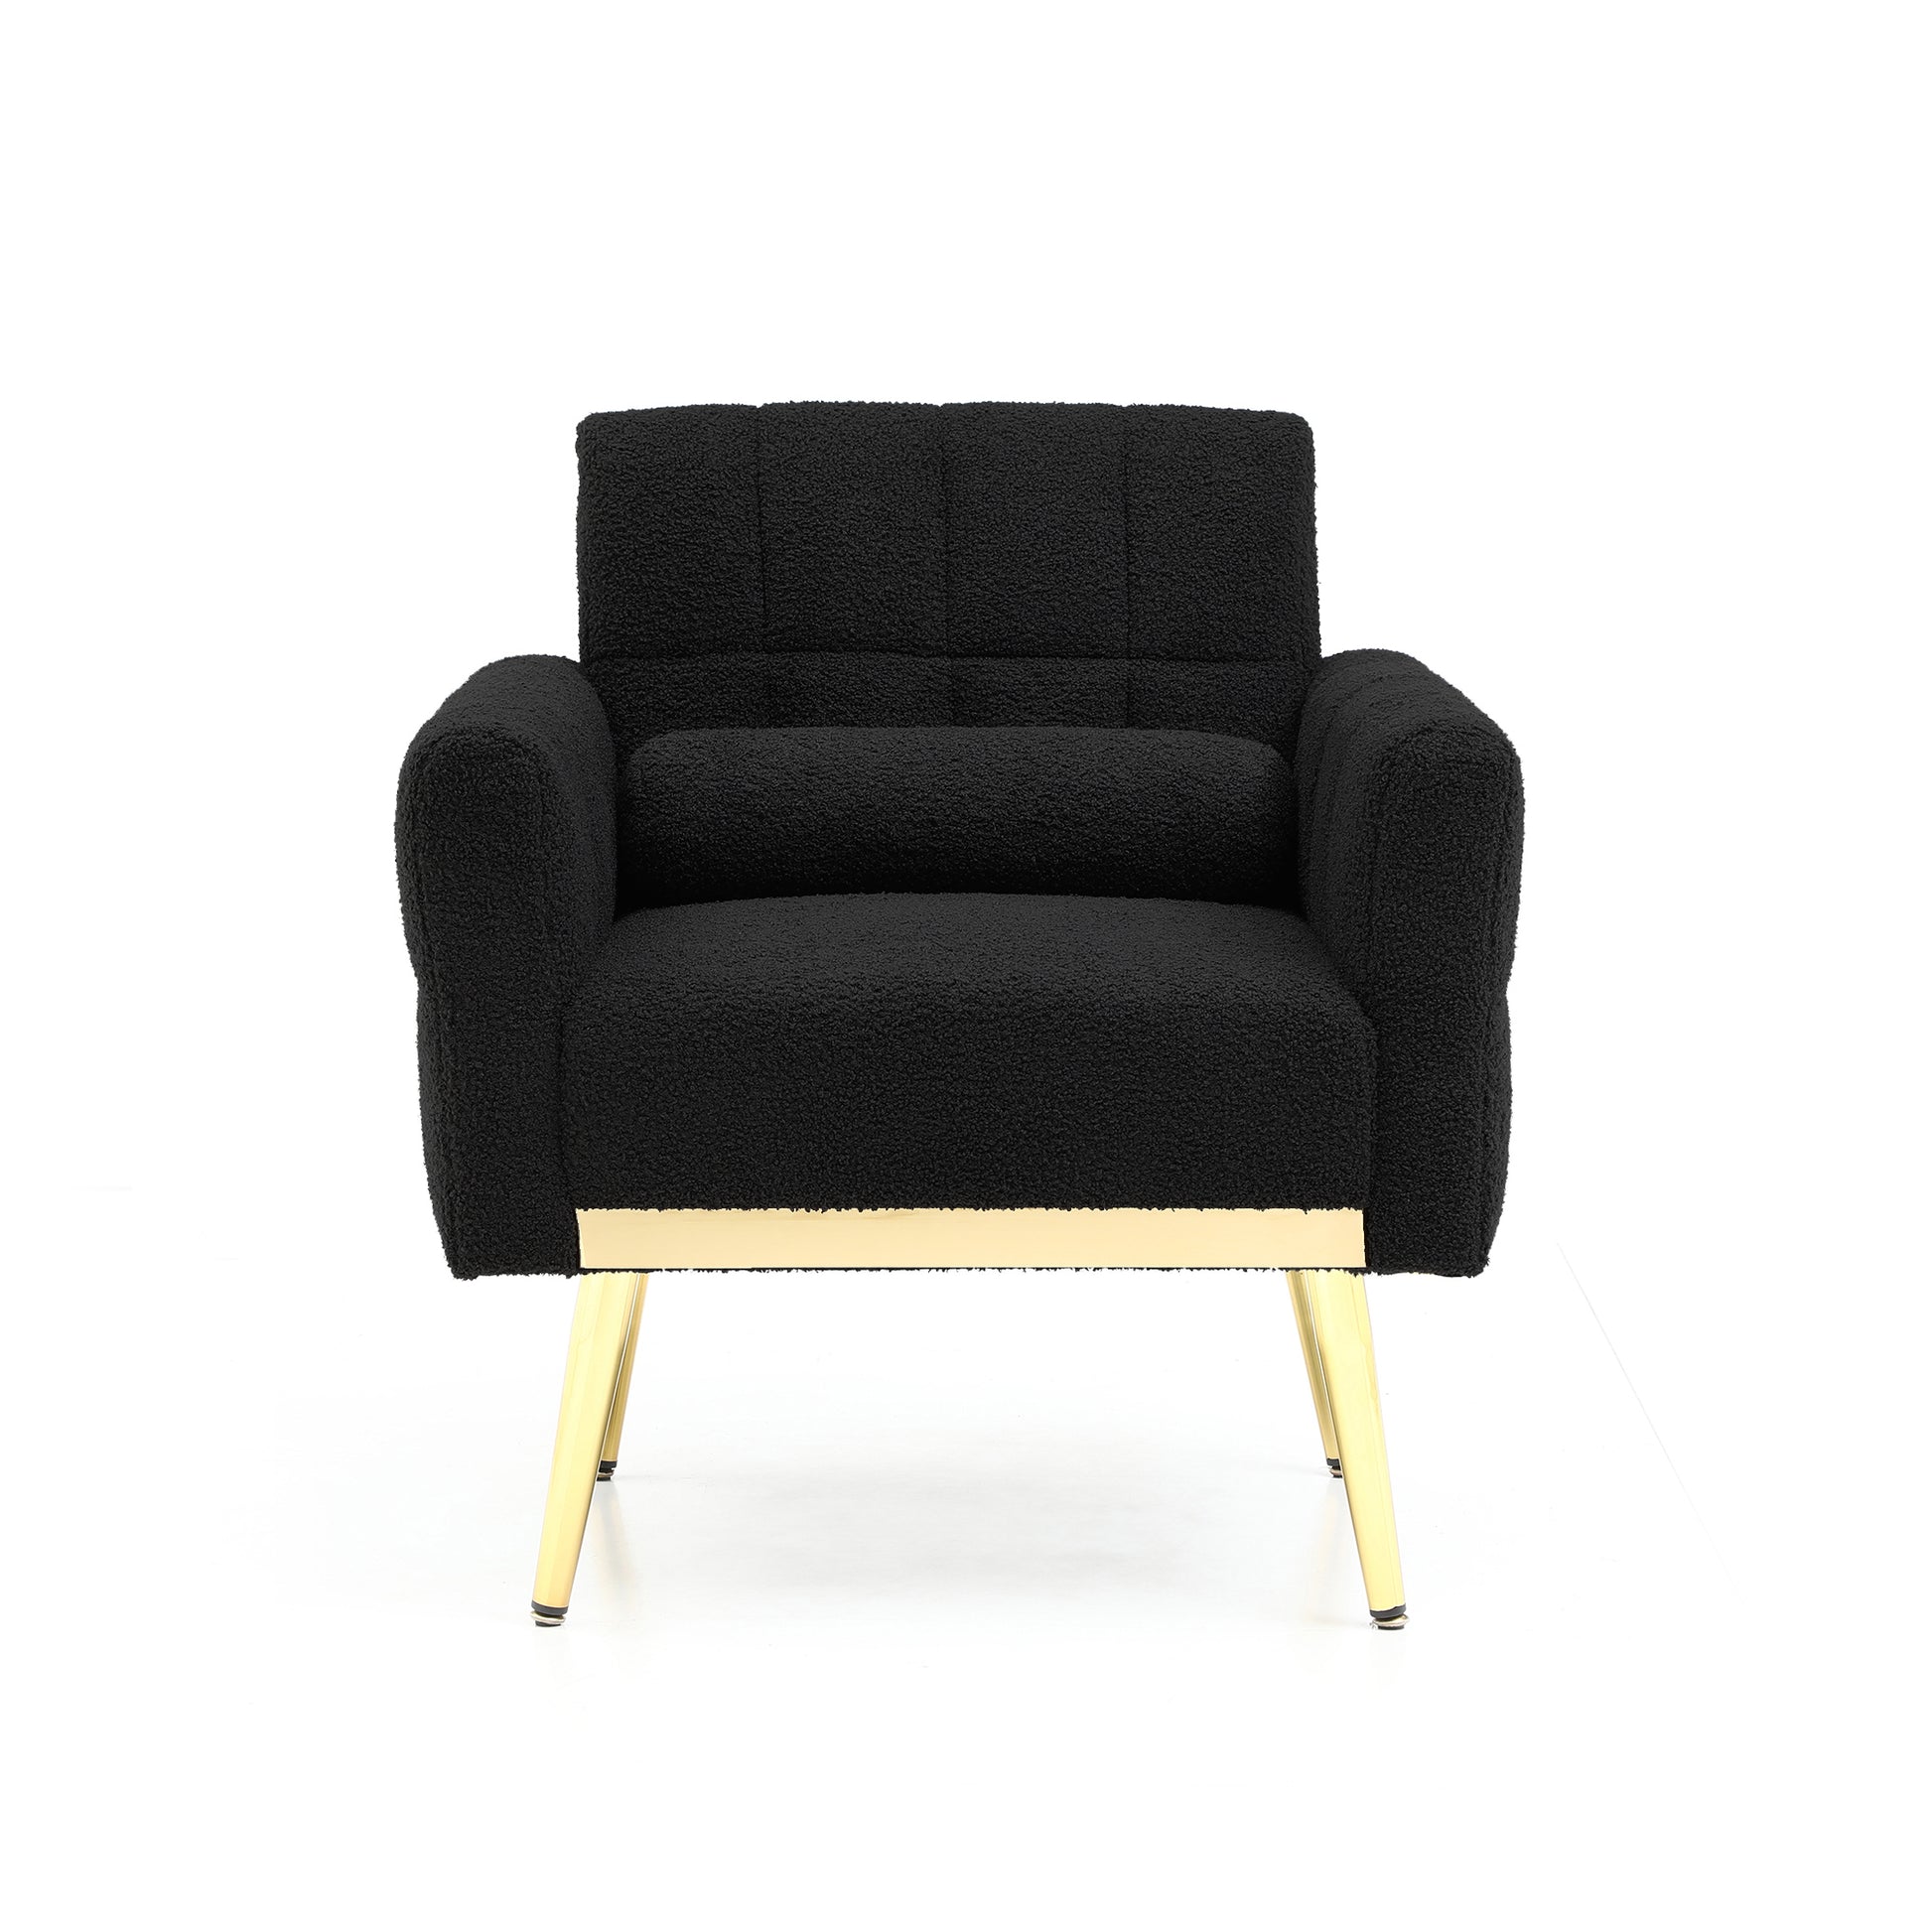 Black Teddy Fabric Accent Chair Modern Side Armchair with Gold Legs Sofa Chairs Reading Chair for Living Room Bedroom Waiting Room - Enova Luxe Home Store